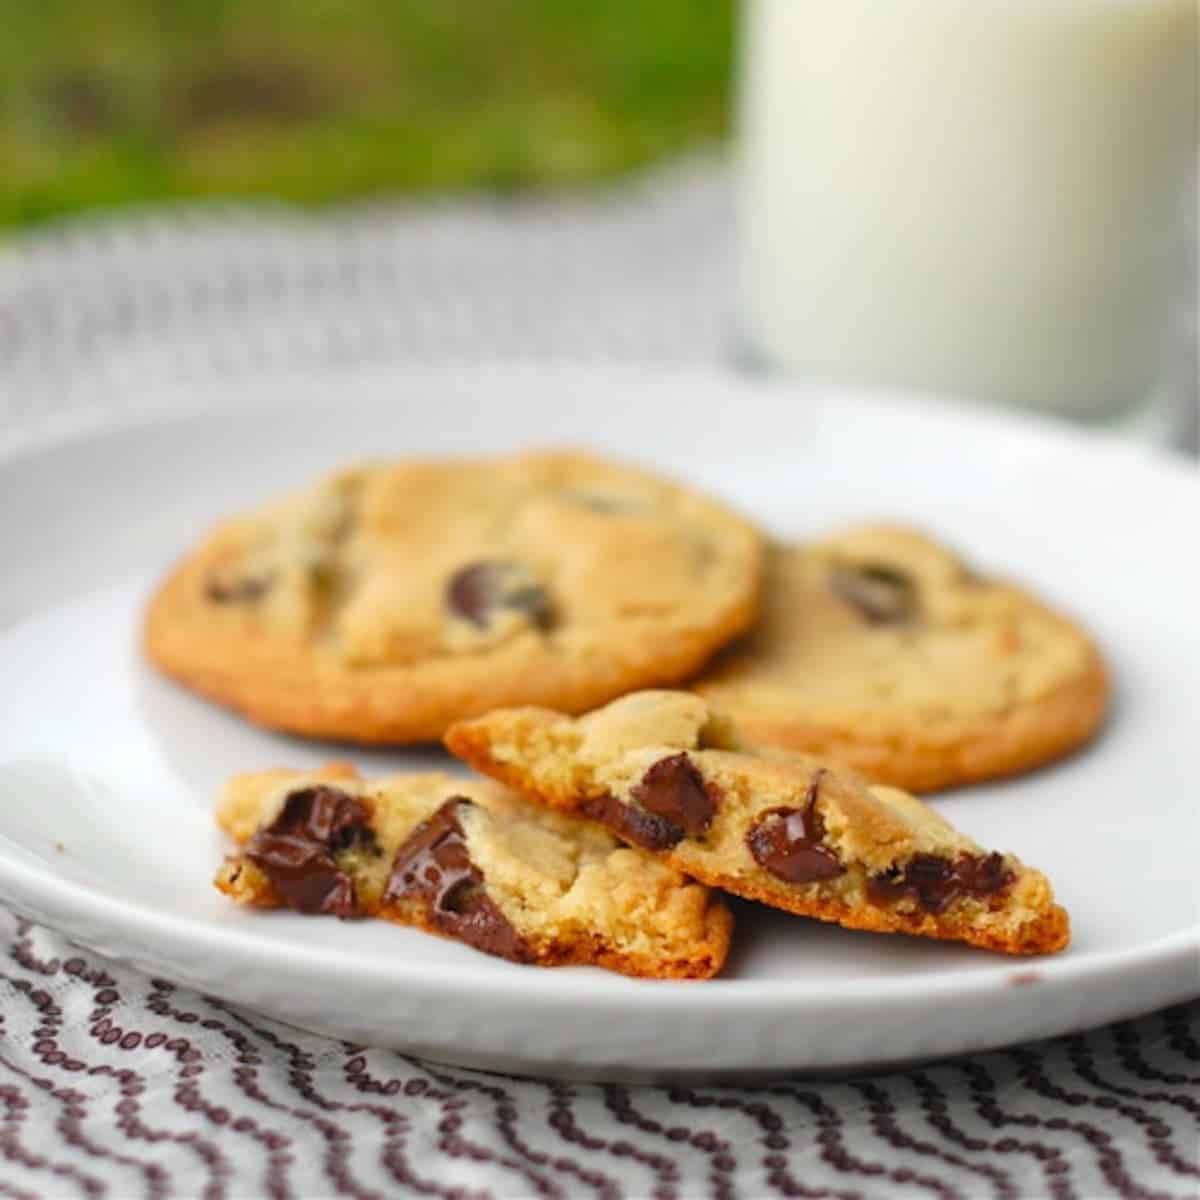 New York Times Chocolate Chip Cookies on a plate.